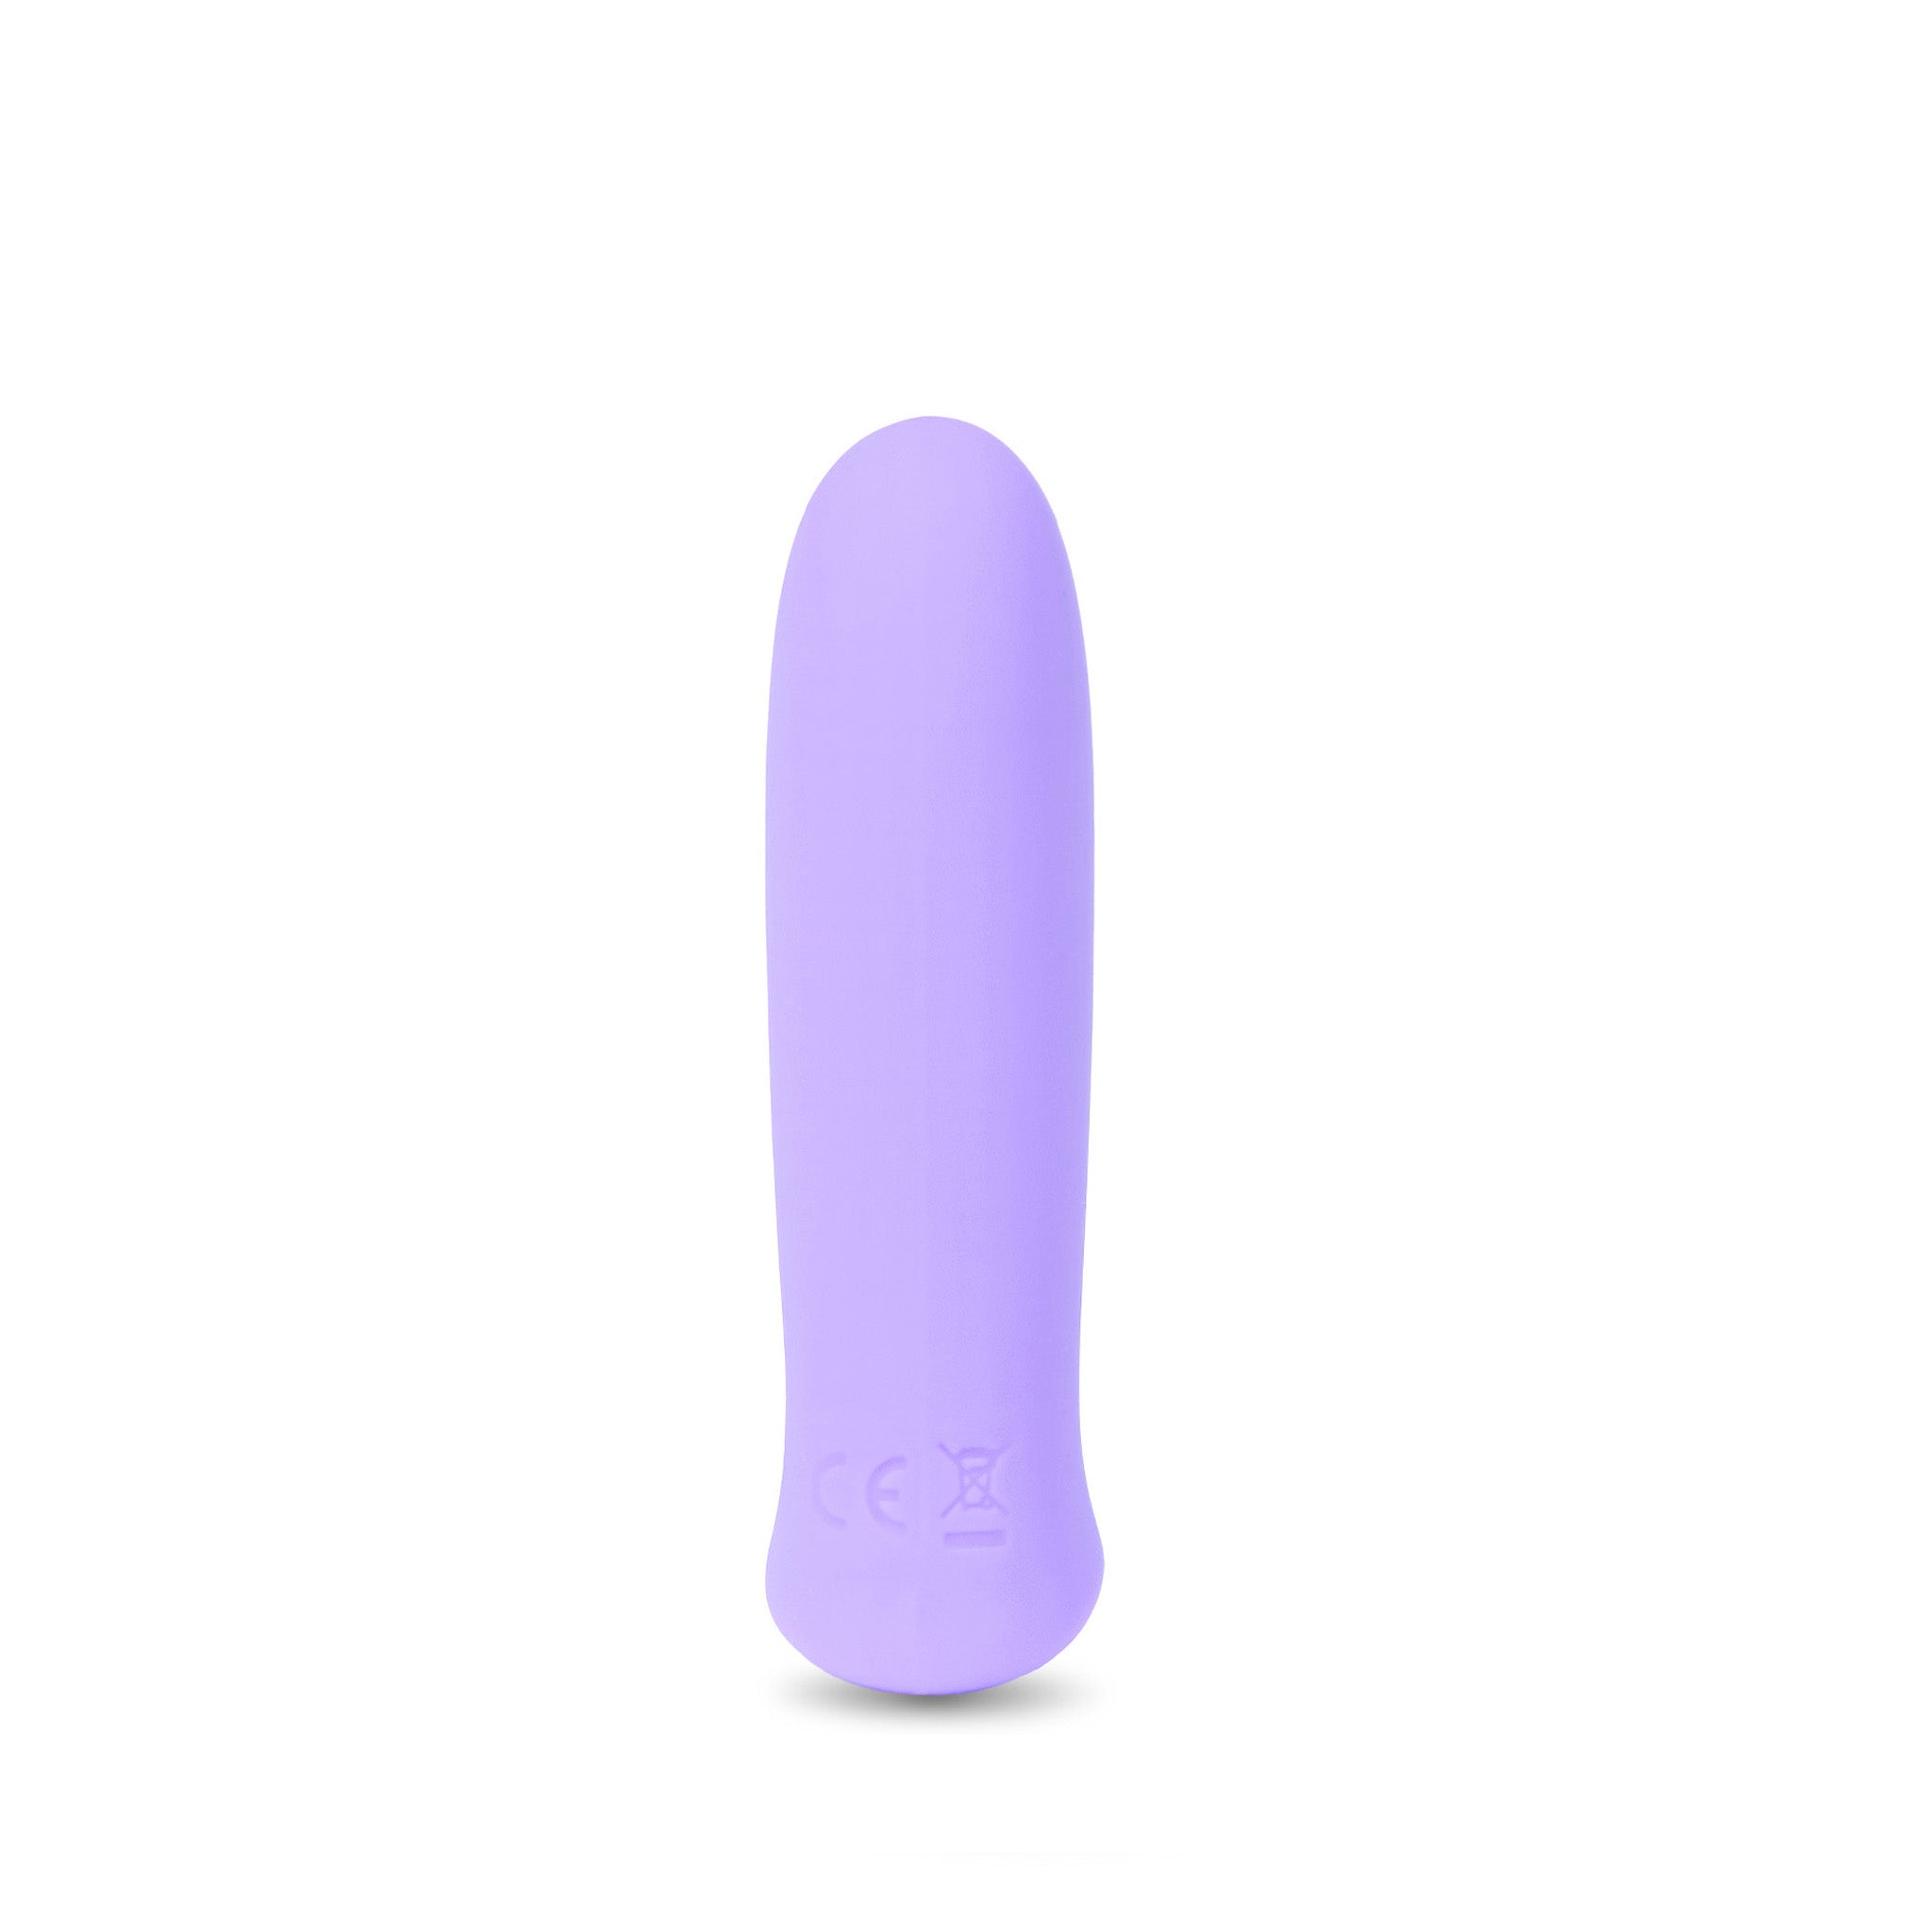 Wireless Rechargeable Mini Vibrating Bullet Vibrator Foreplay Sex Toy for Couple